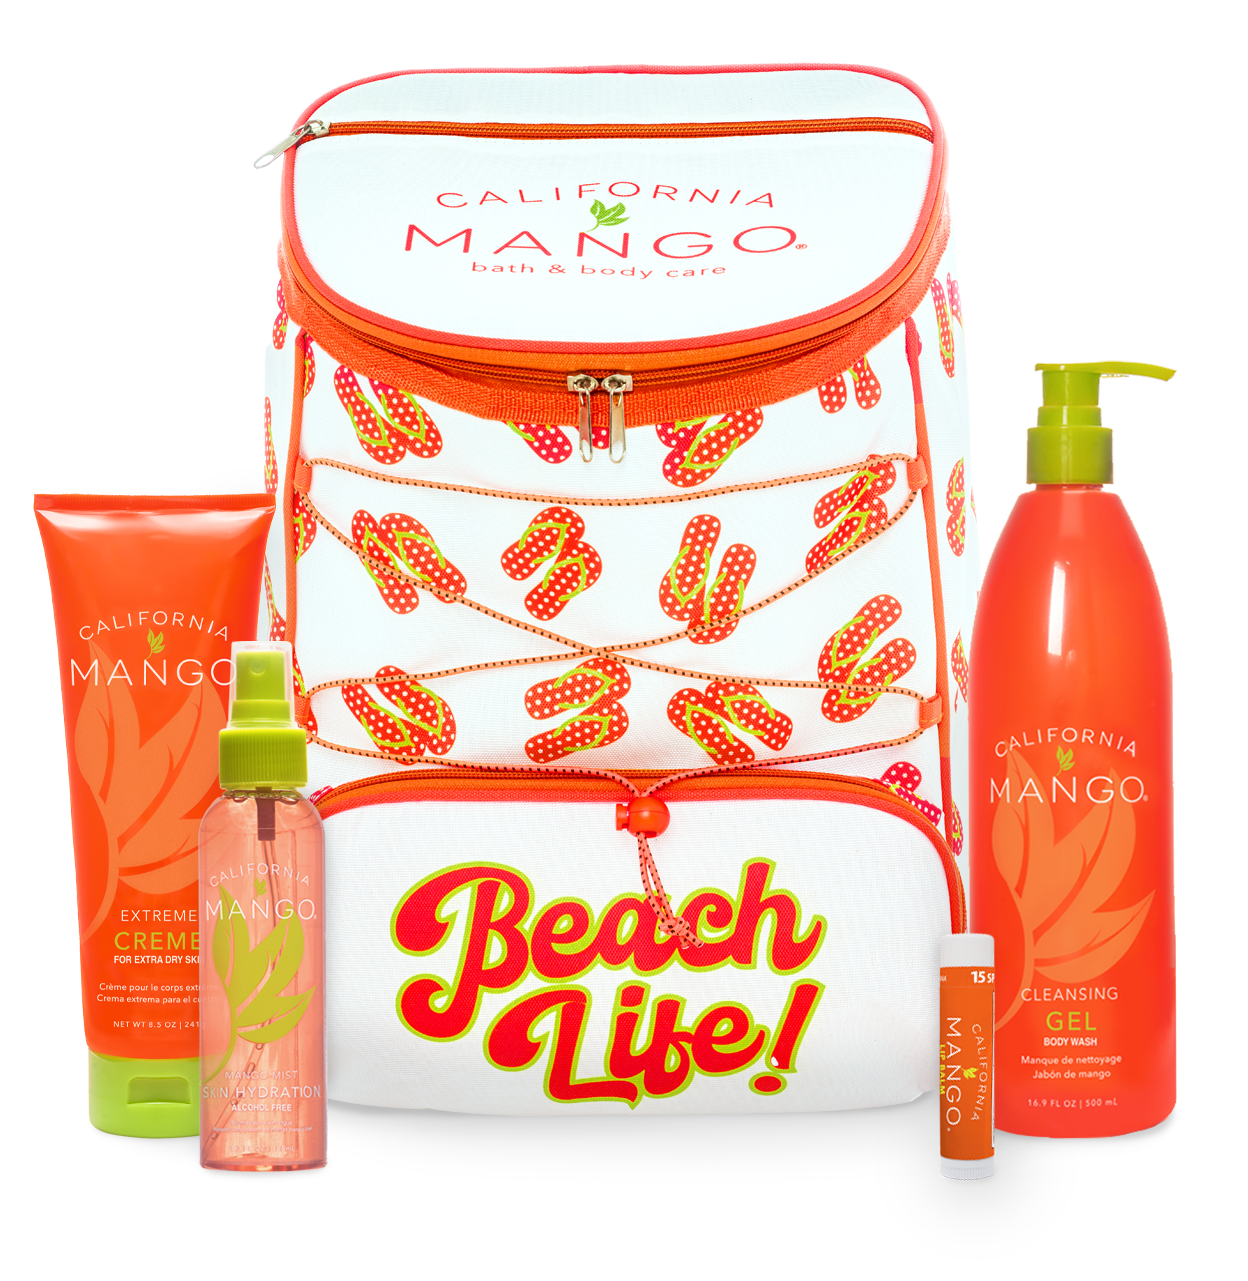 Beach Life! Cali-Backpack Cooler 5-PC Kit with Extreme Crème